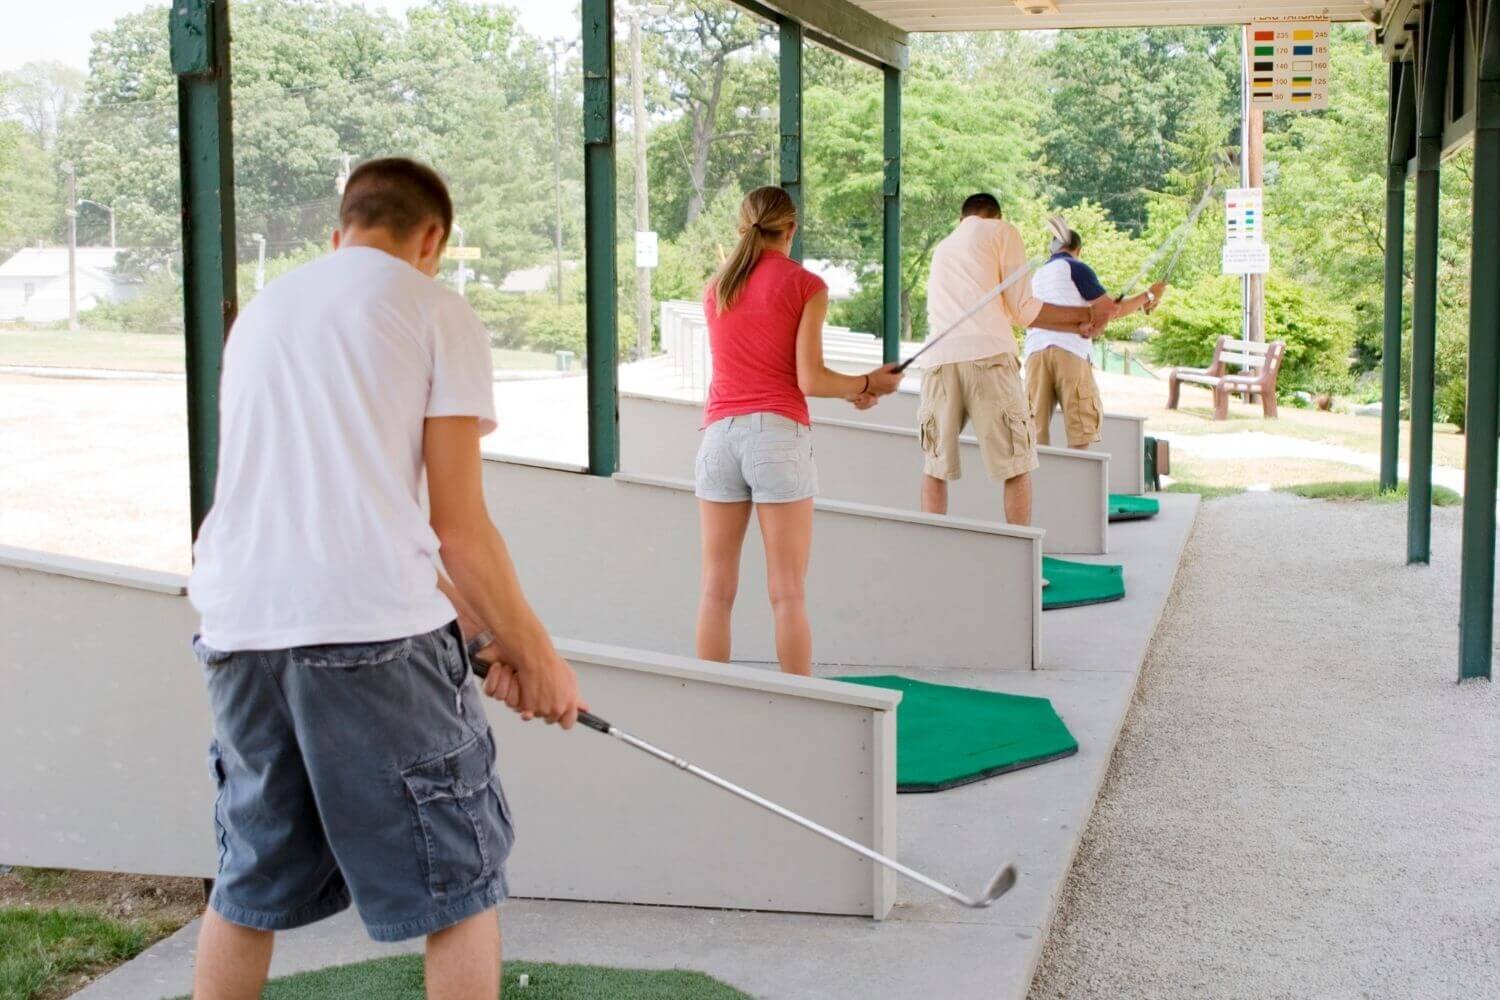 Woman and men practicing golf at a driving range